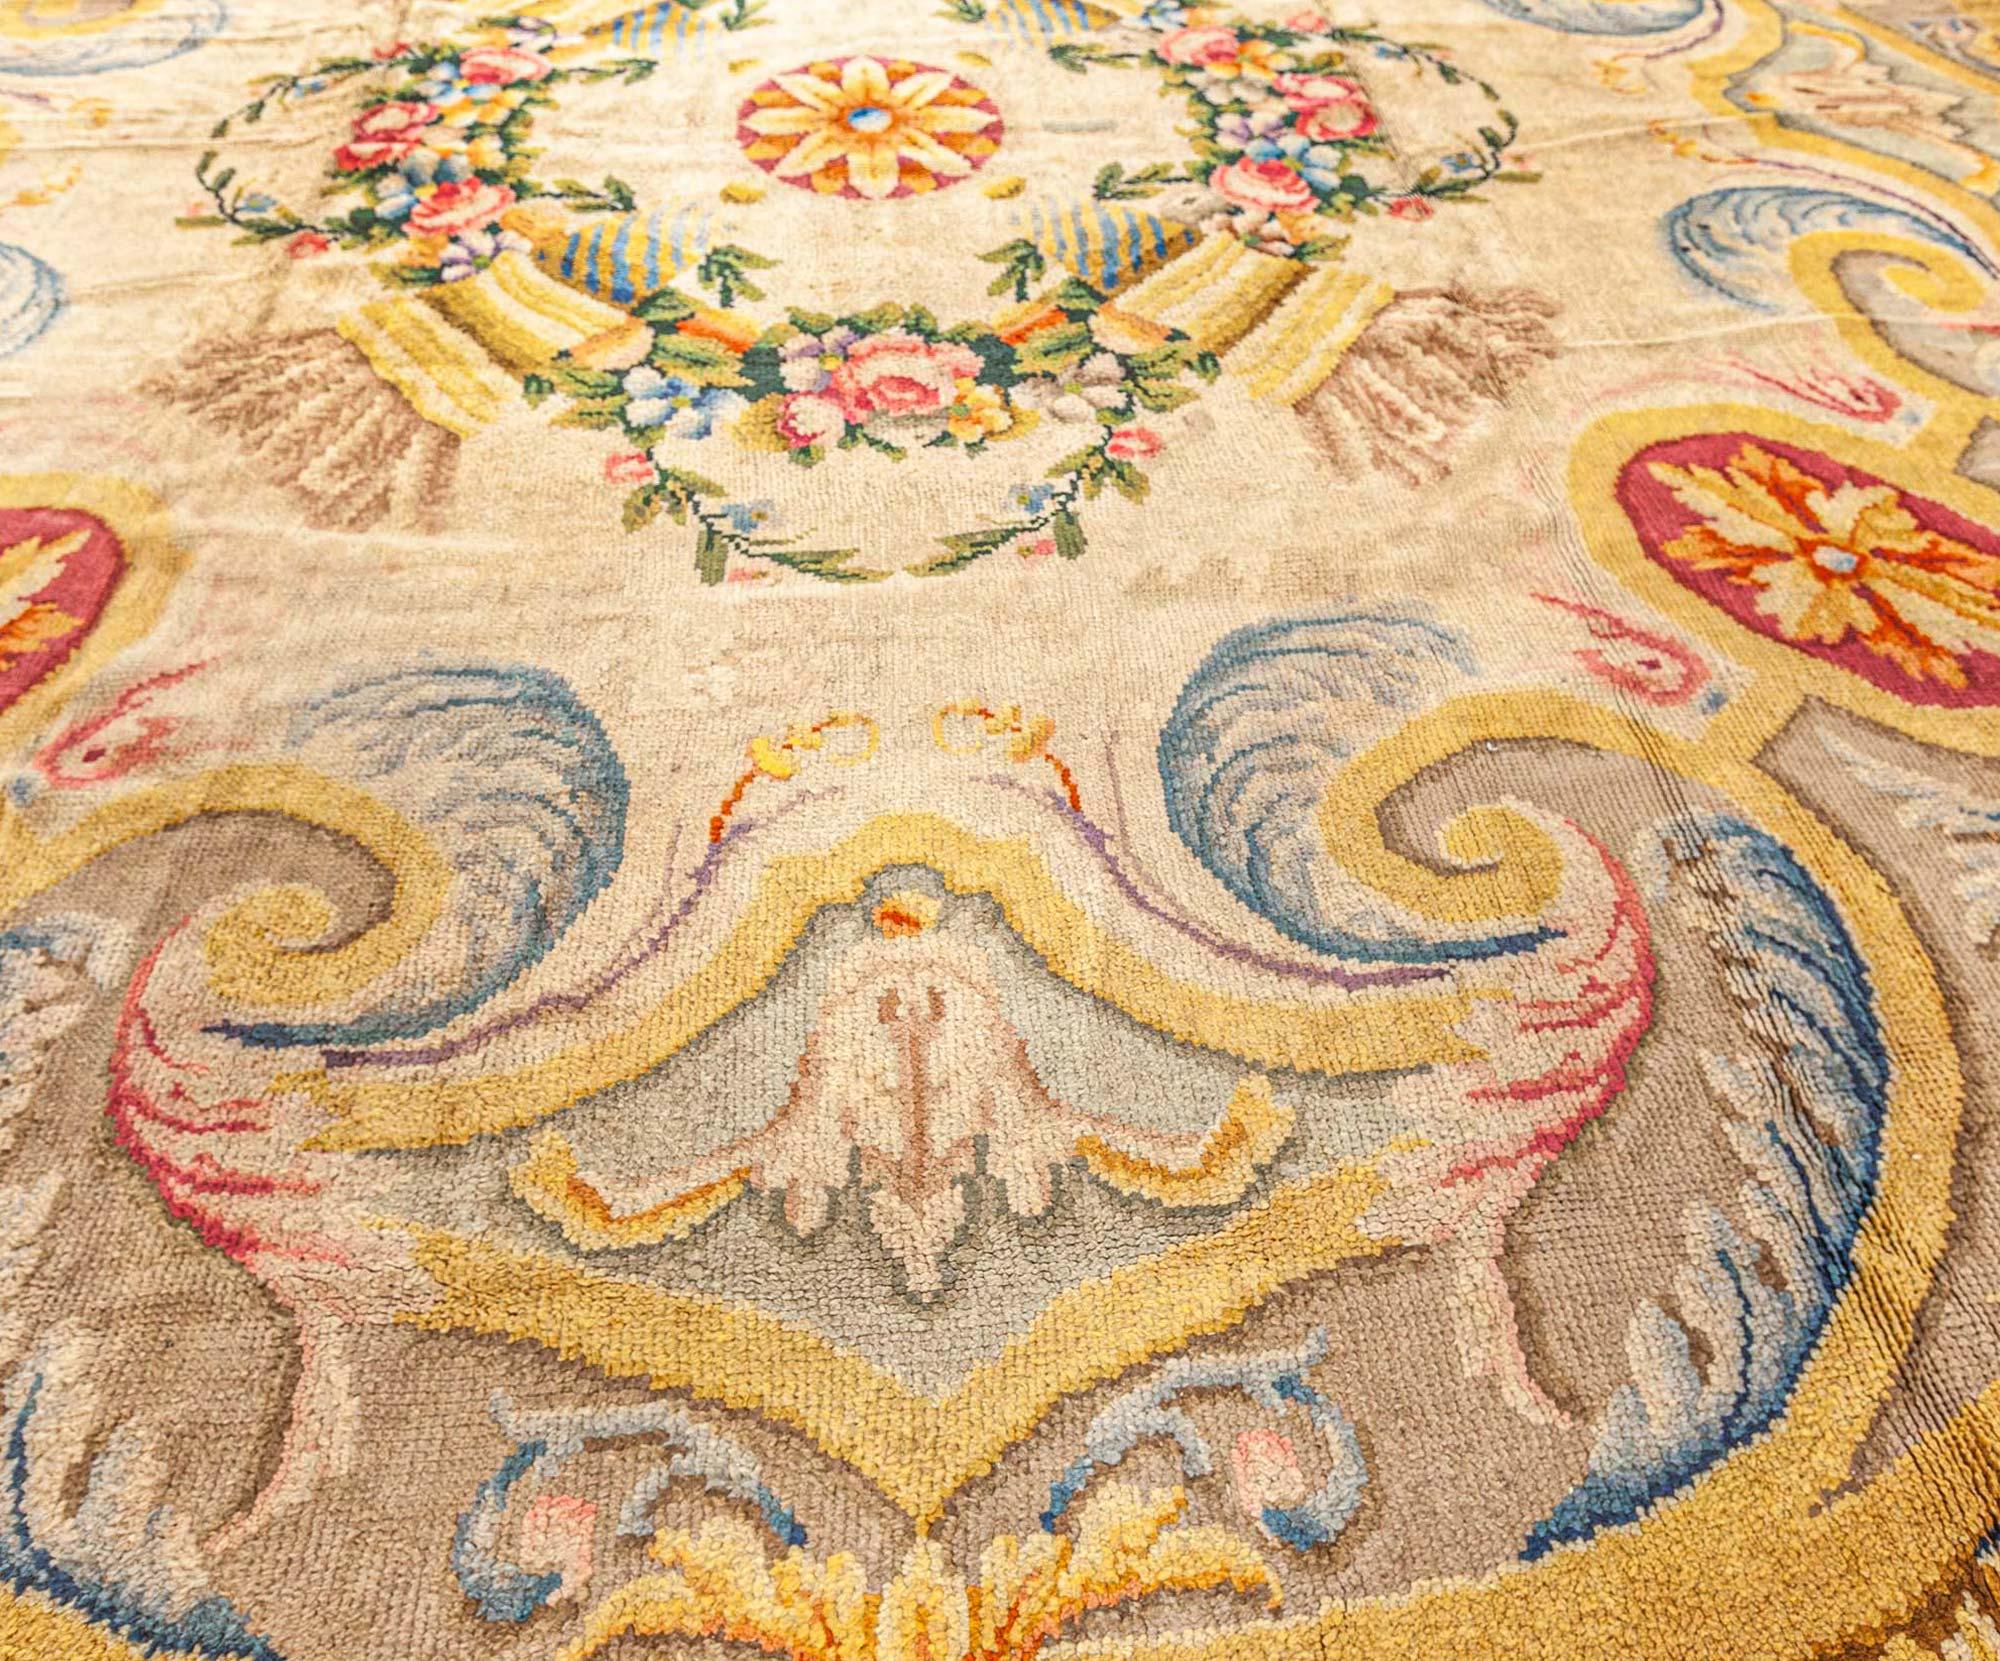 One-of-a-kind Savonnerie style Spanish circular fragmentary rug.
Size: 15'0